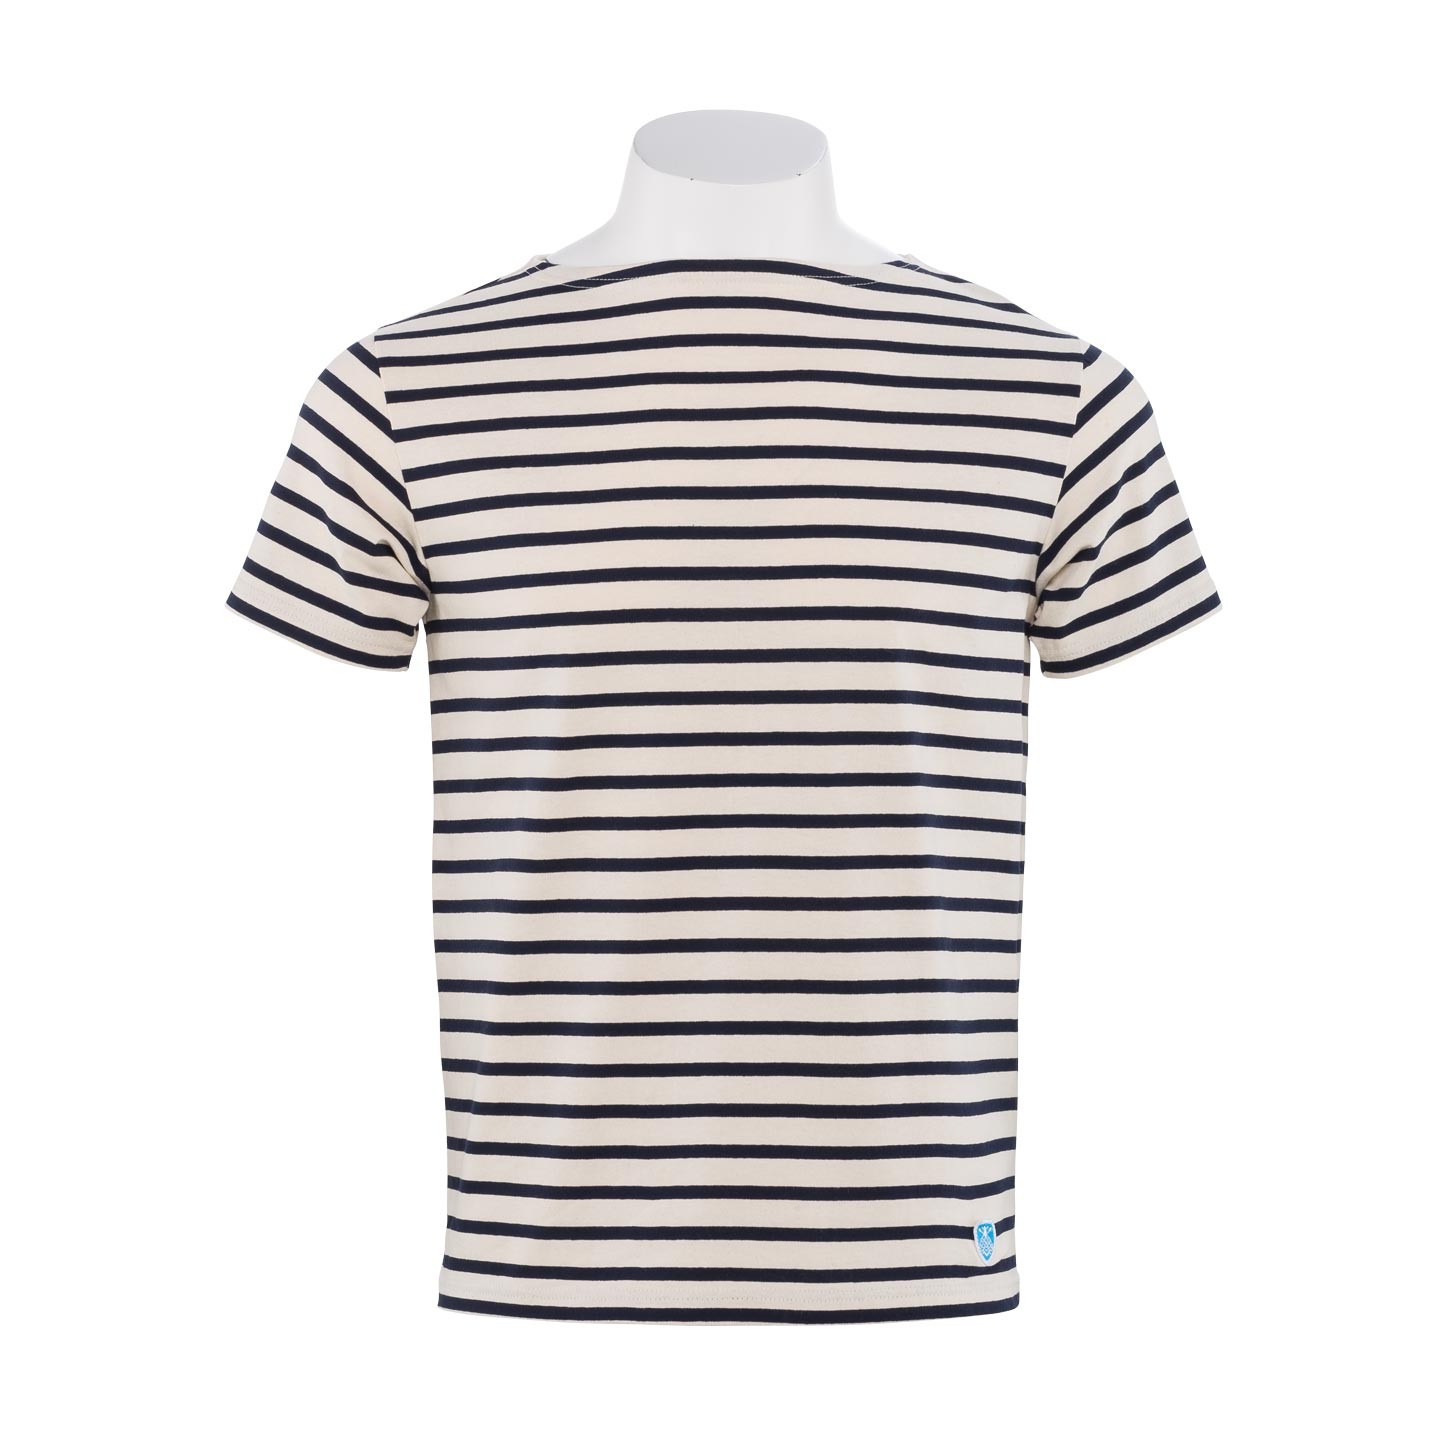 Short striped shirt Ecru / Navy, unisex made in France Orcival